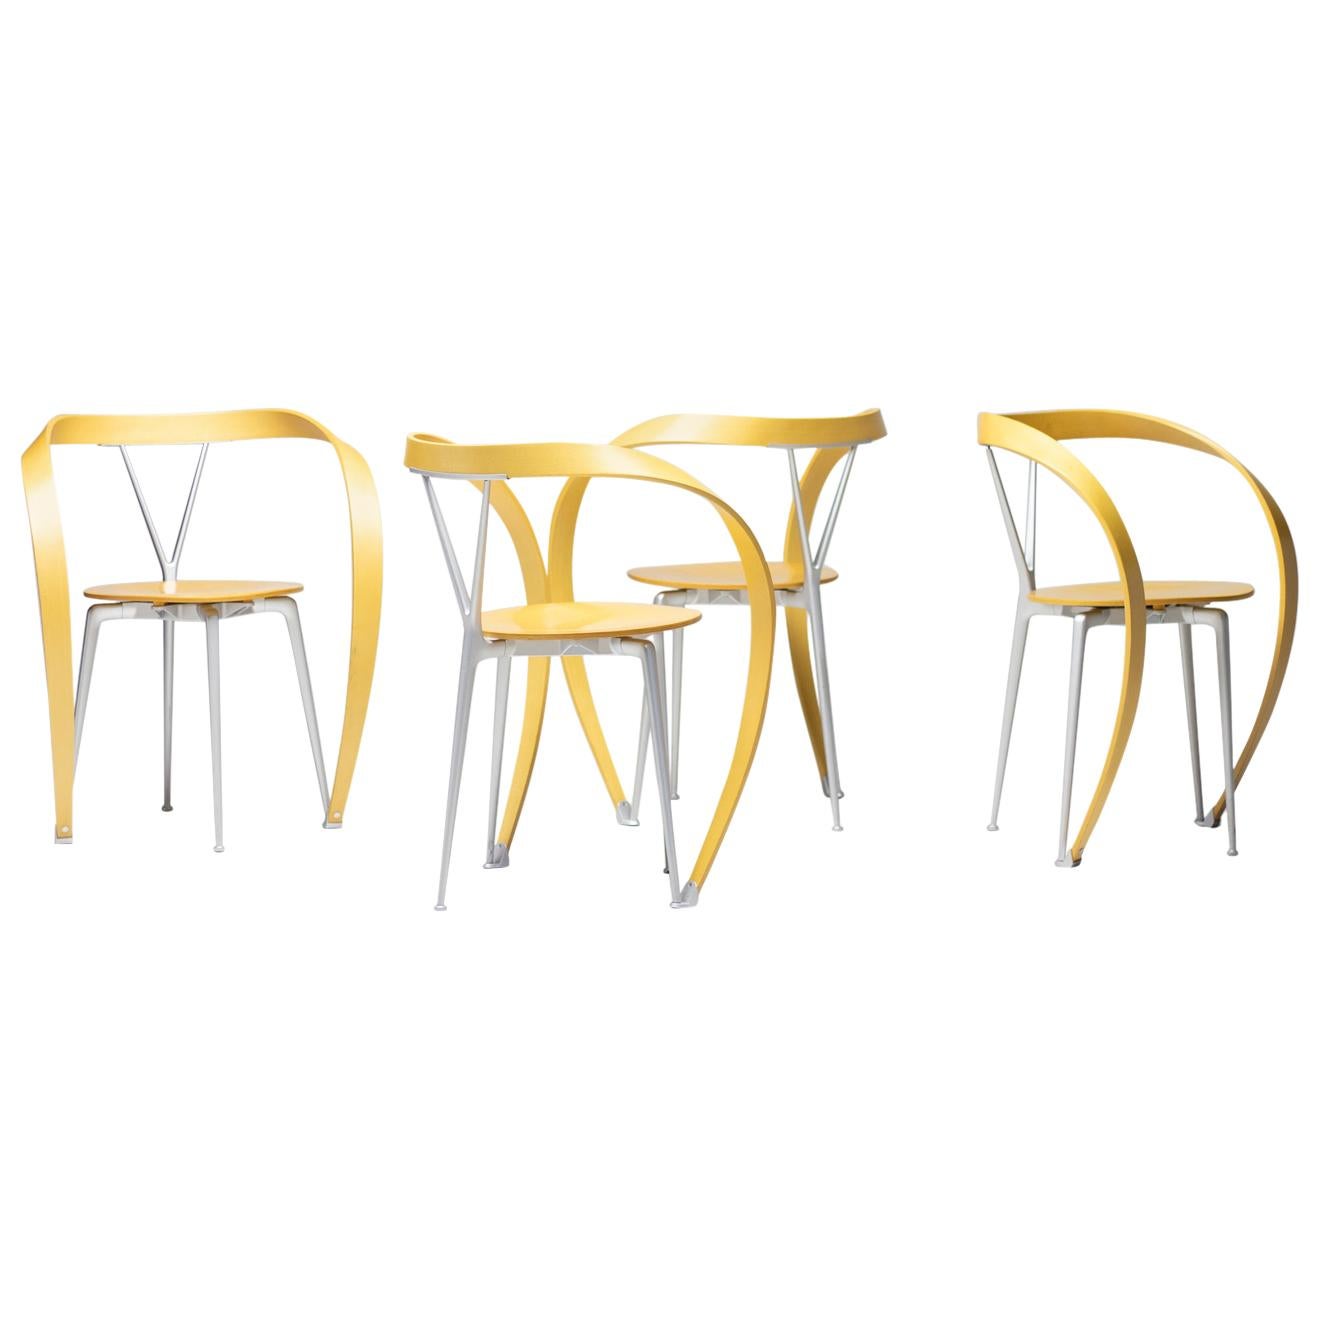 Set of Four Revers Chairs by Andrea Branzi for Cassina, Italy